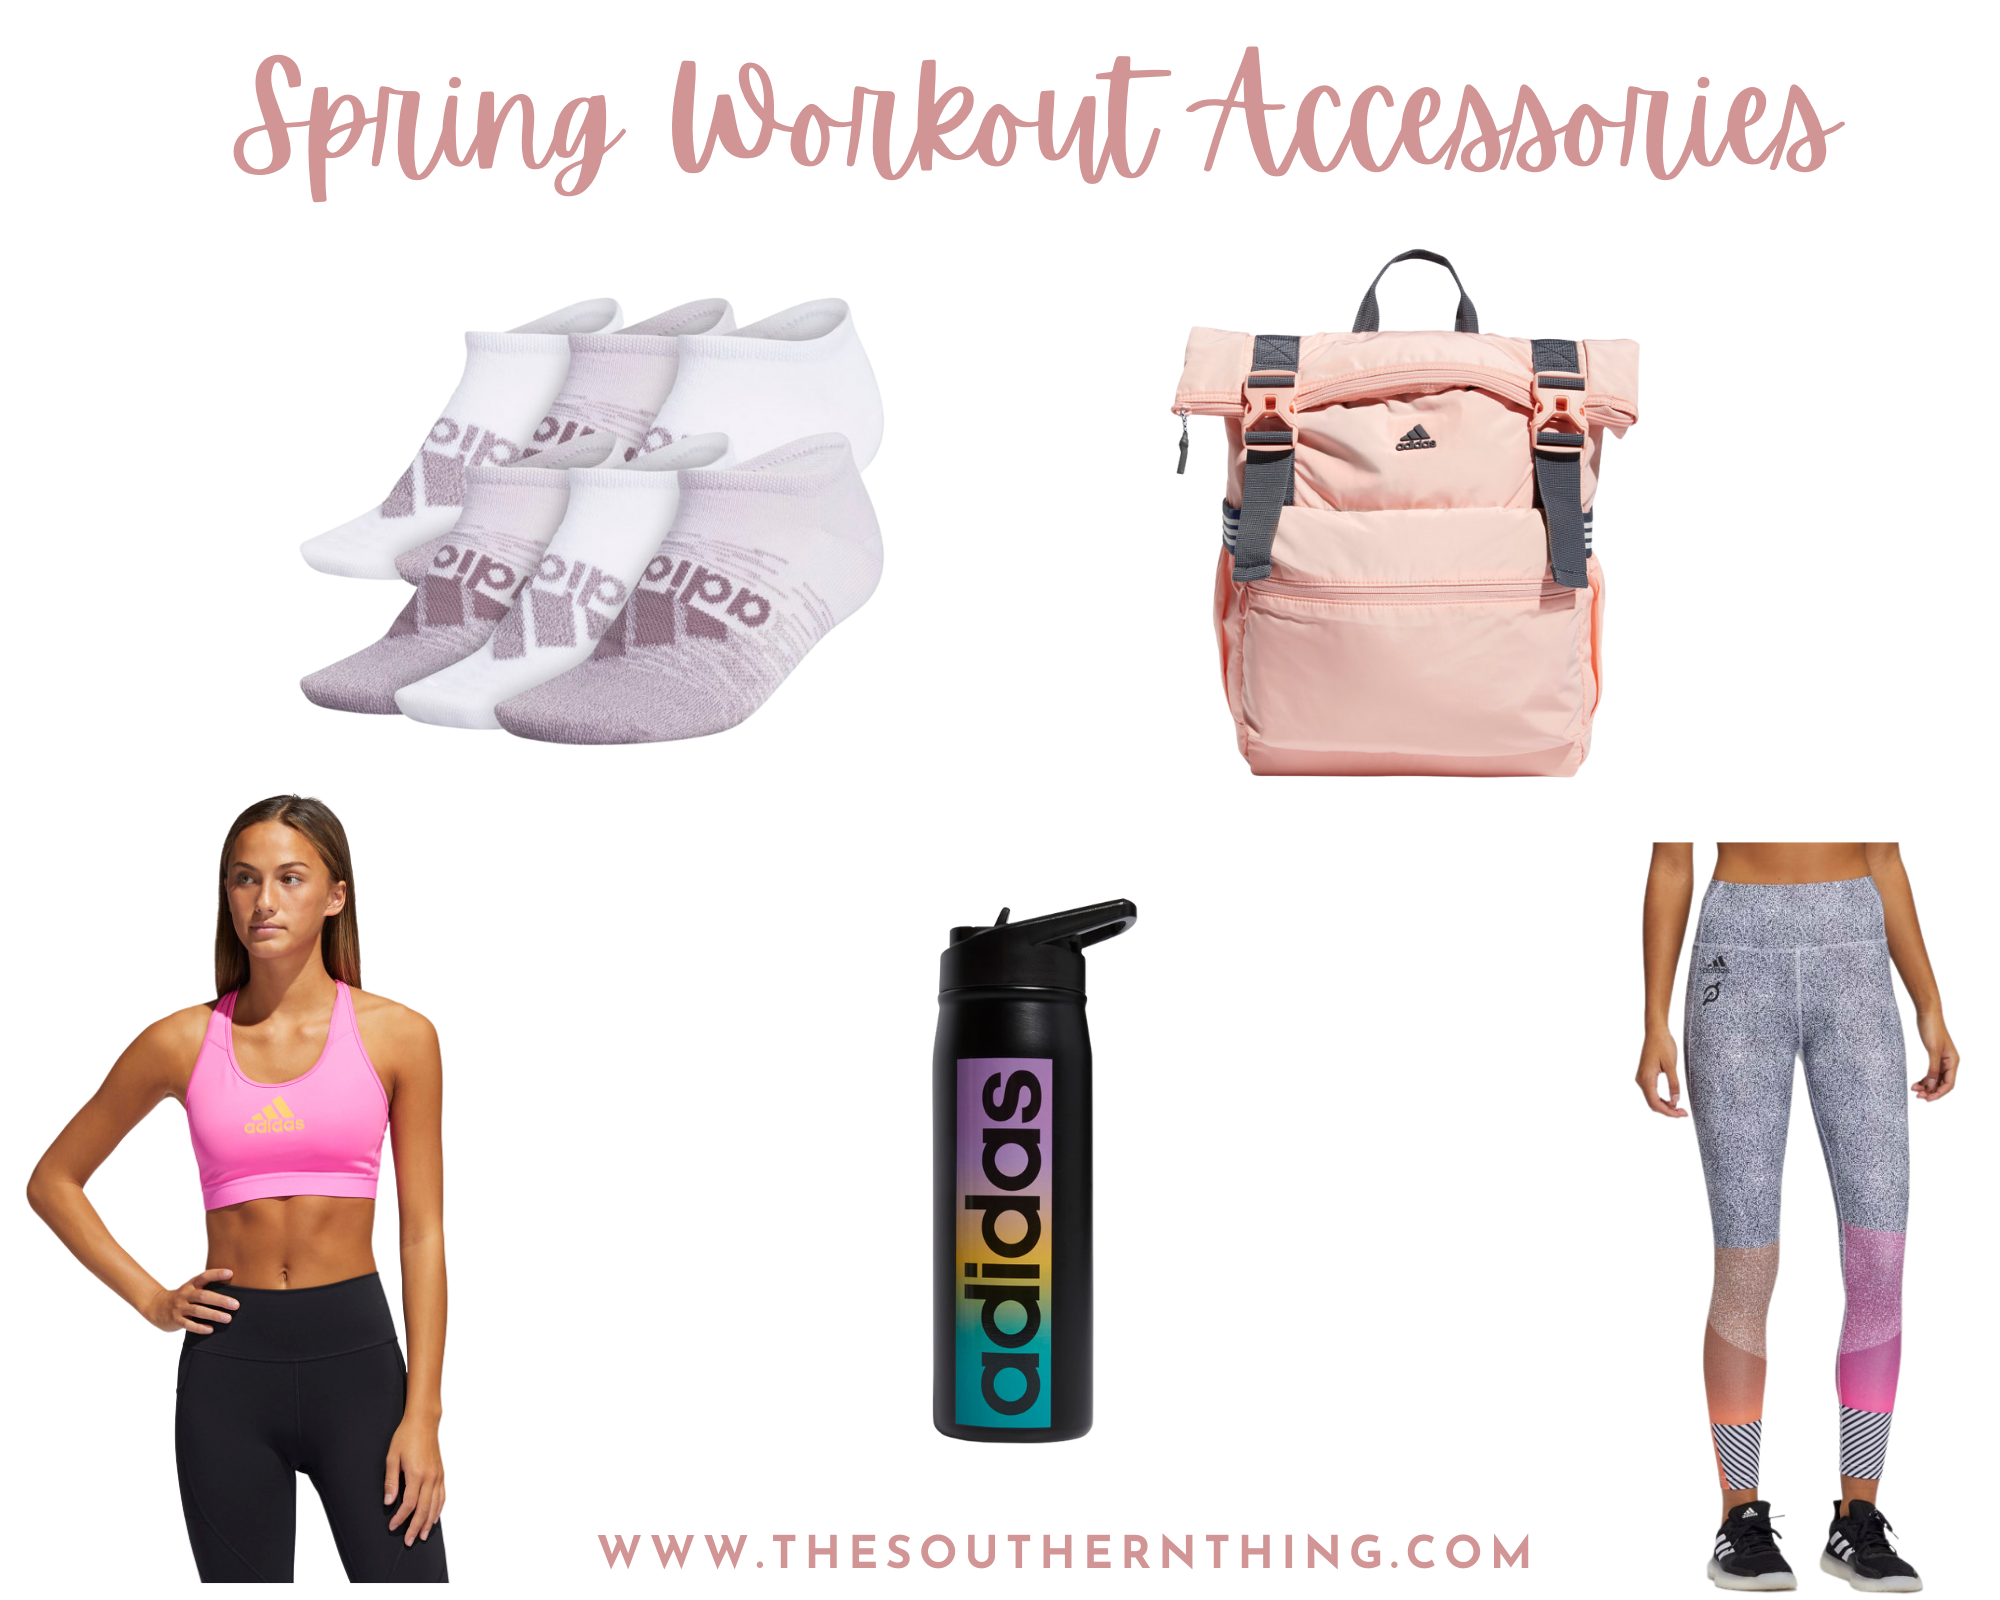 https://www.thesouthernthing.com/wp-content/uploads/2021/03/Spring-Workout-Accessories.png